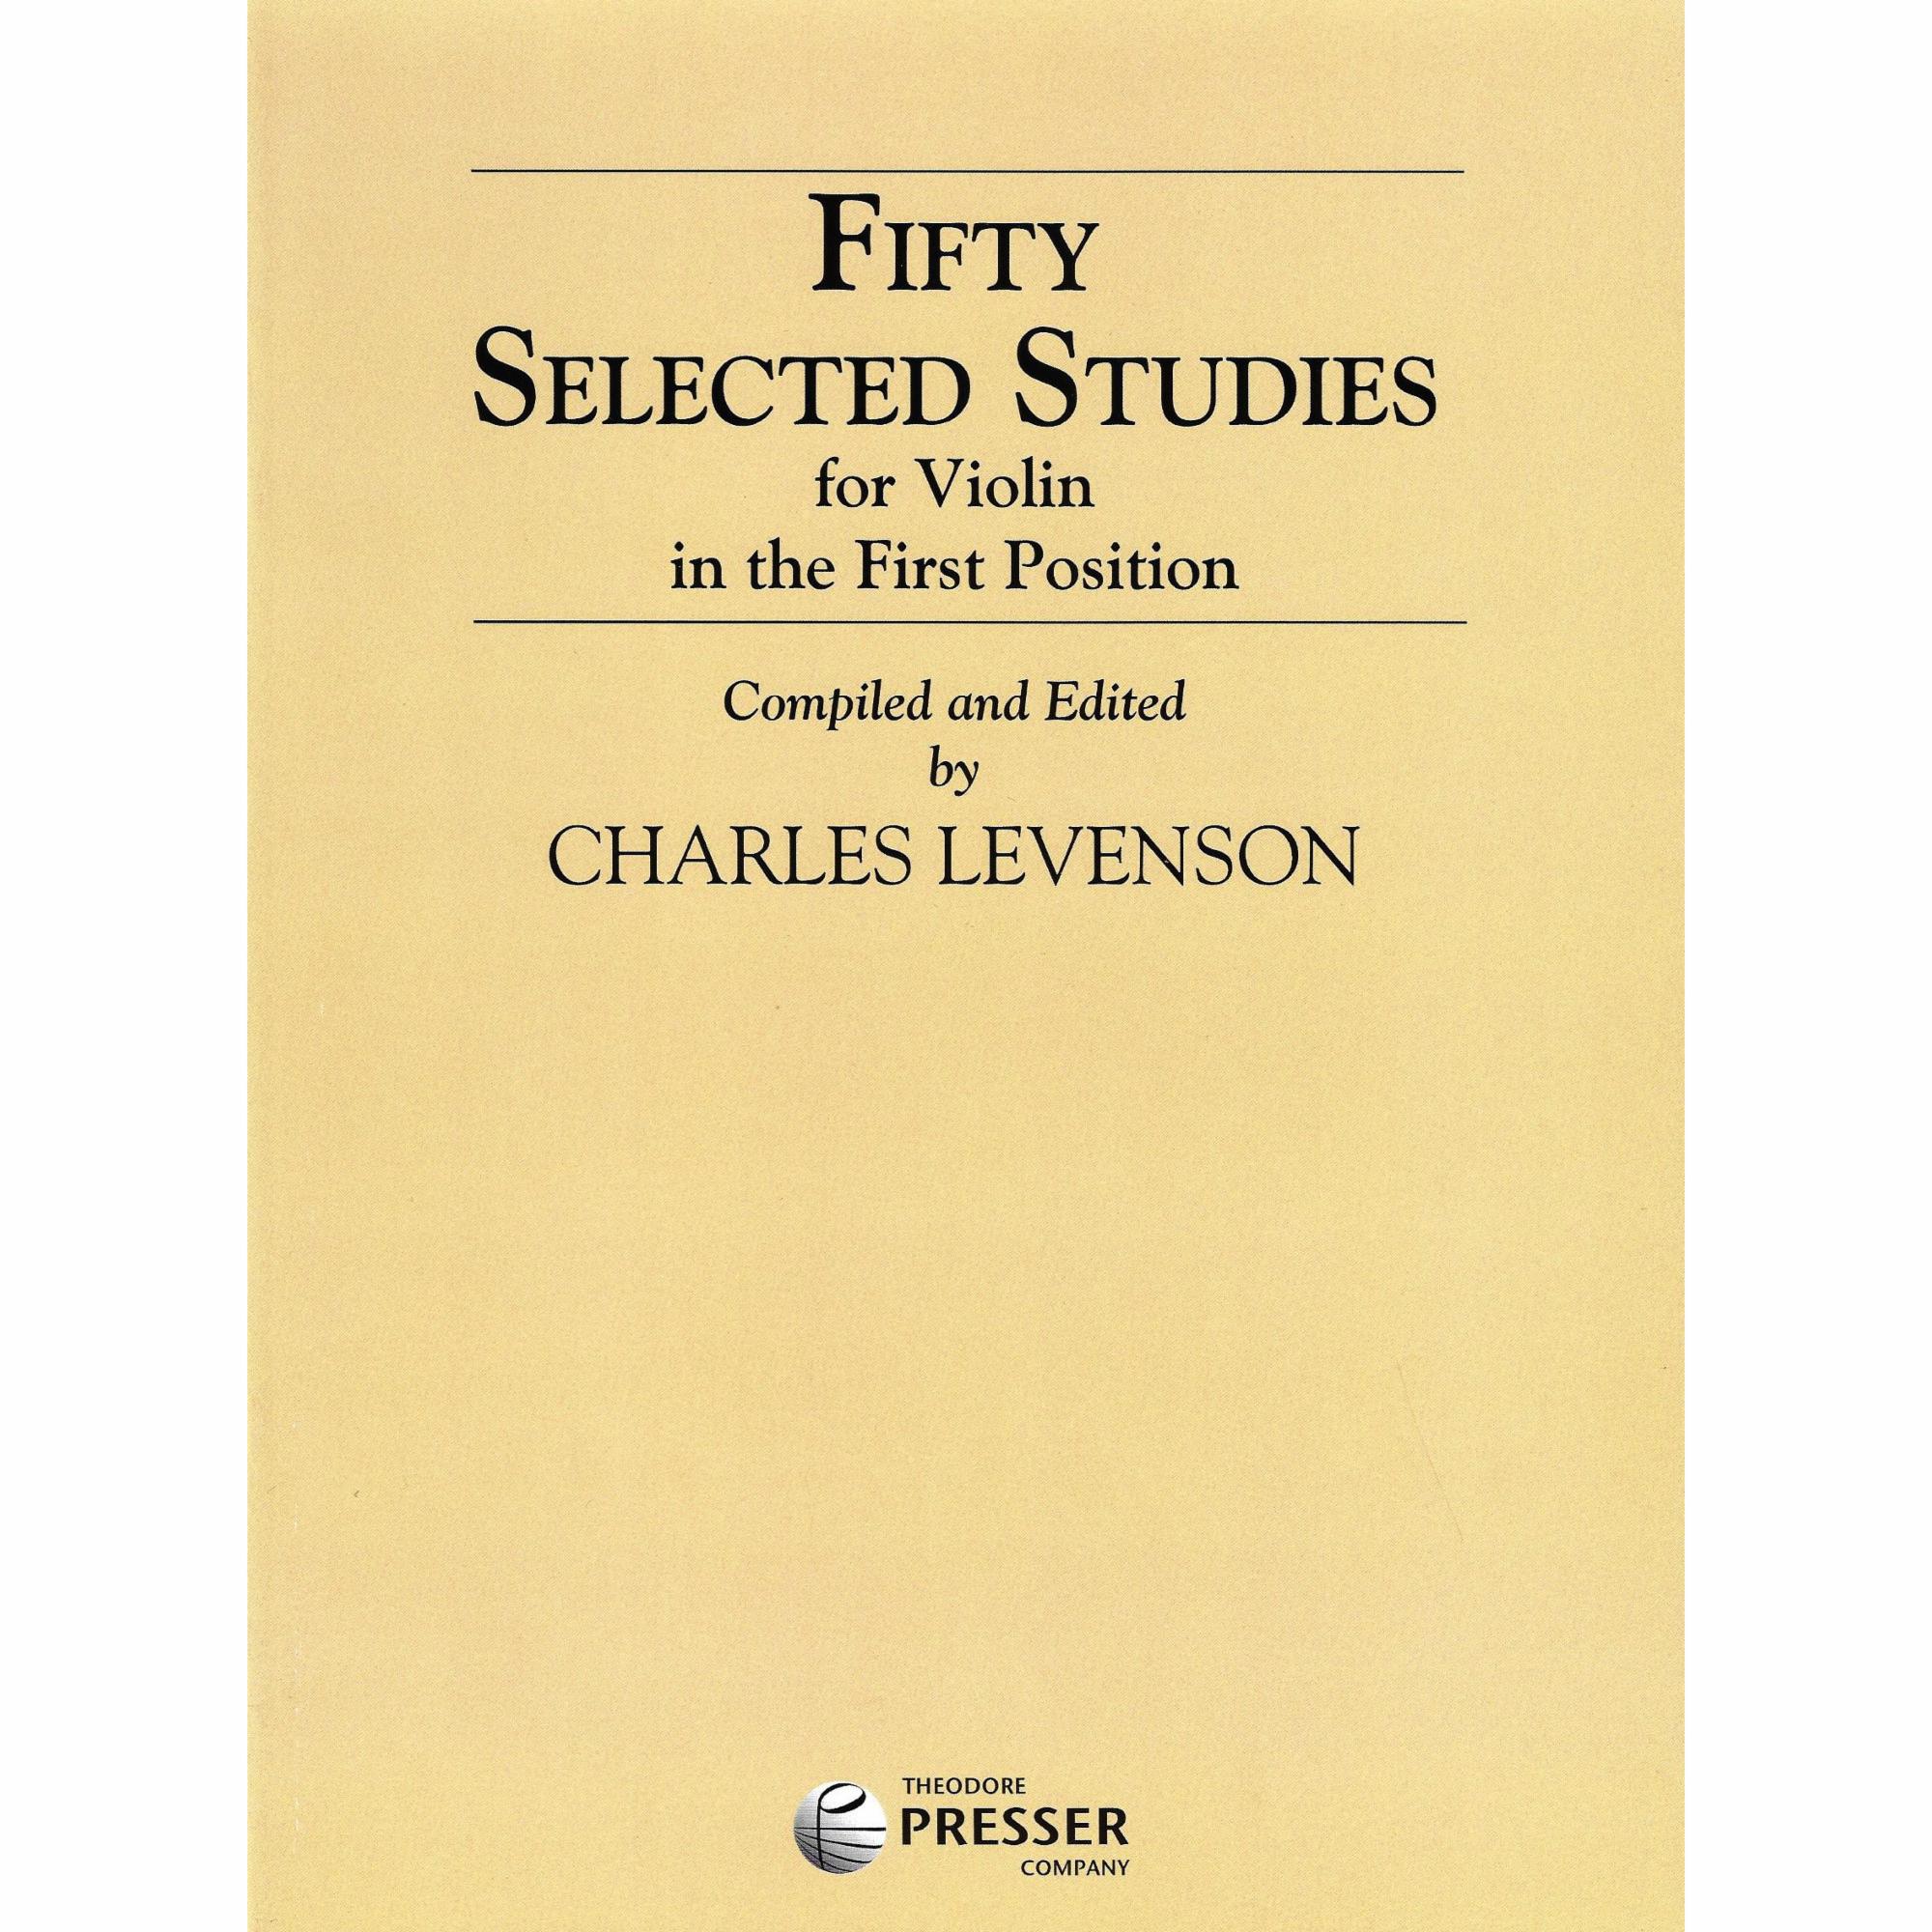 Fifty Selected Studies for Violin